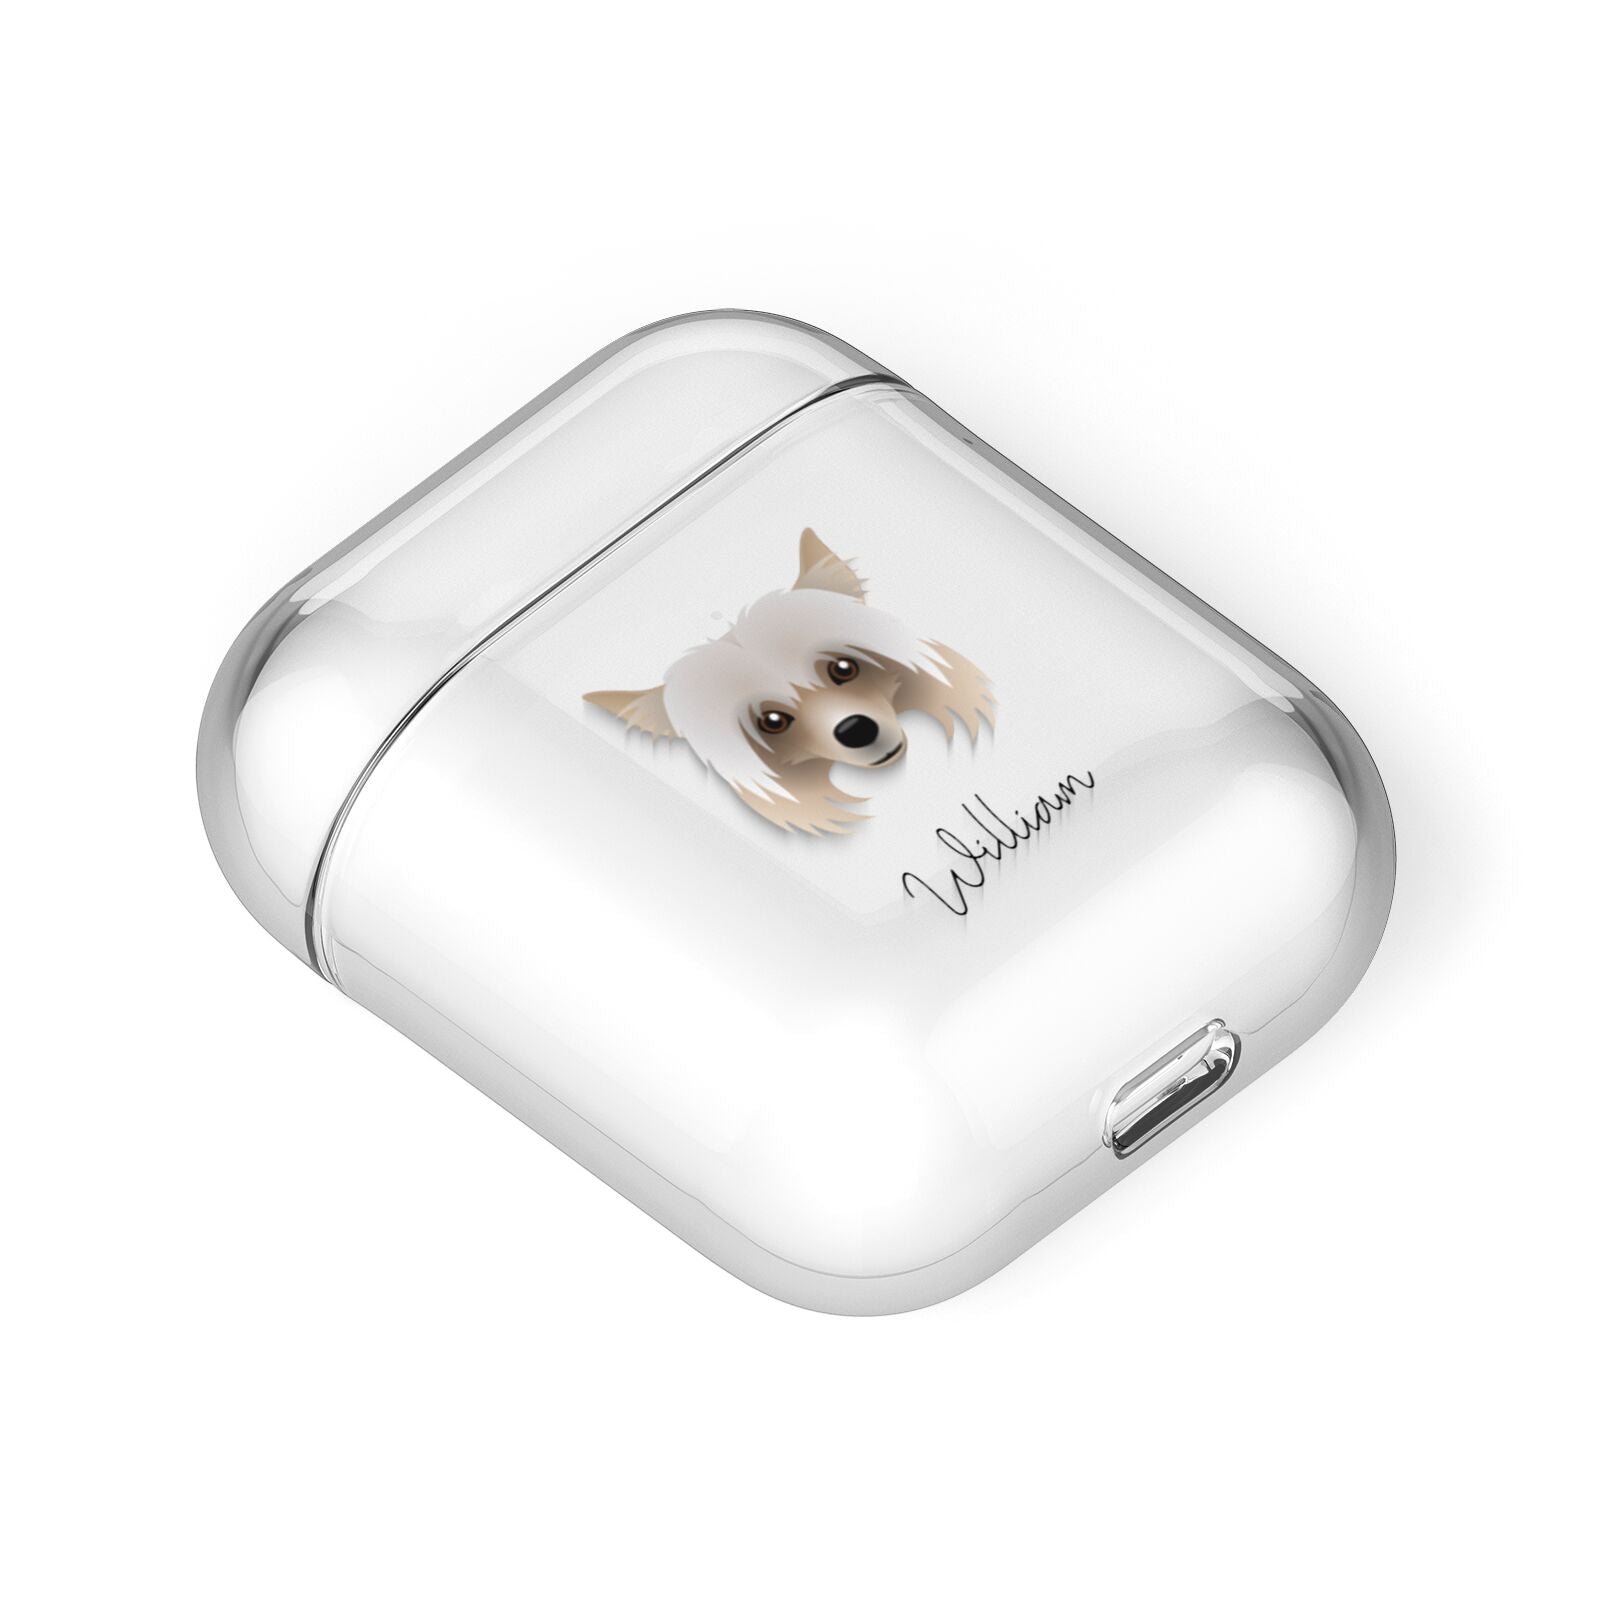 Powderpuff Chinese Crested Personalised AirPods Case Laid Flat